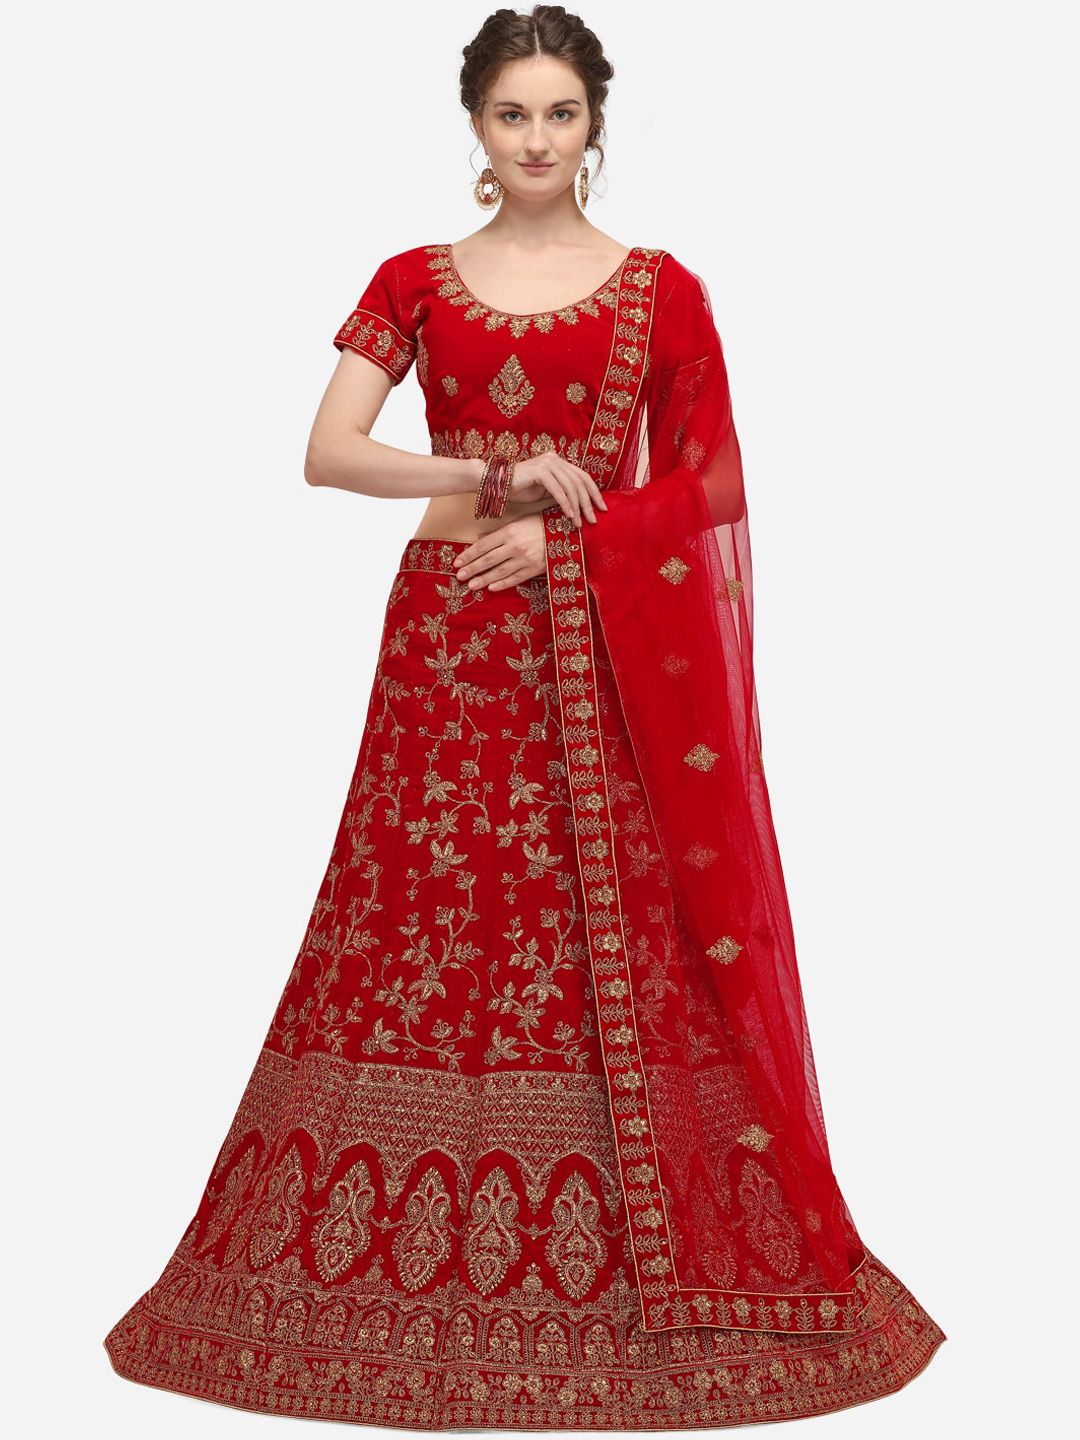 Netram Red & Gold-Toned Embroidered Semi-Stitched Lehenga & Blouse with Dupatta Price in India